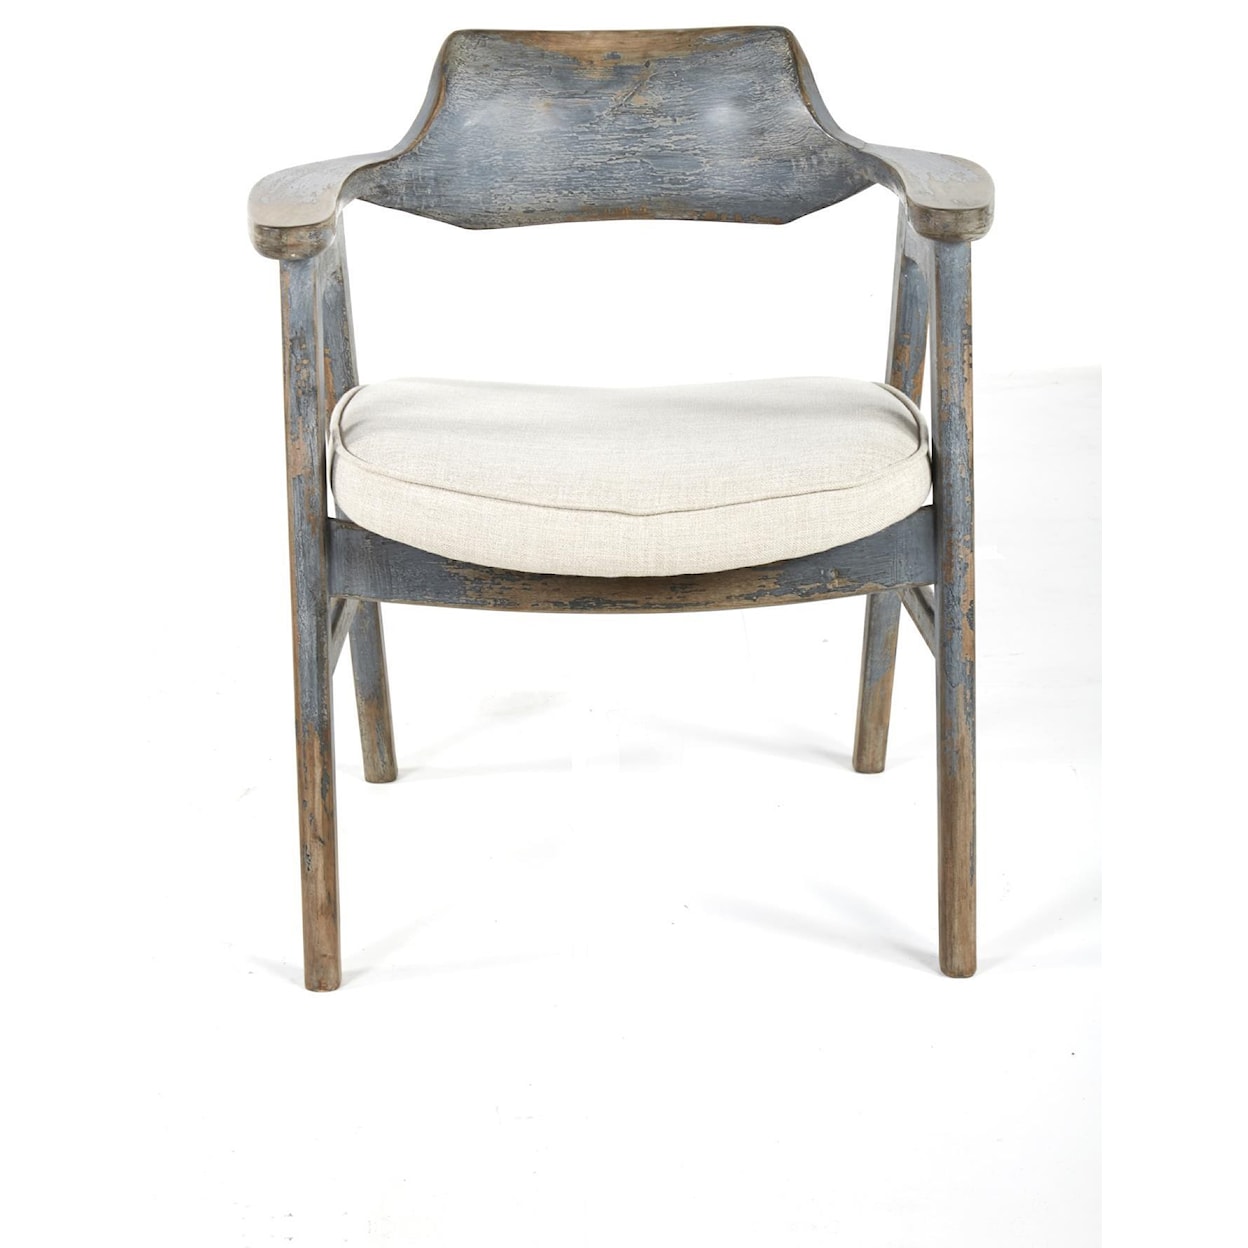 EAGLE INDUSTRIES Wagner Wagner Arm Chair Distressed Blue / Sand